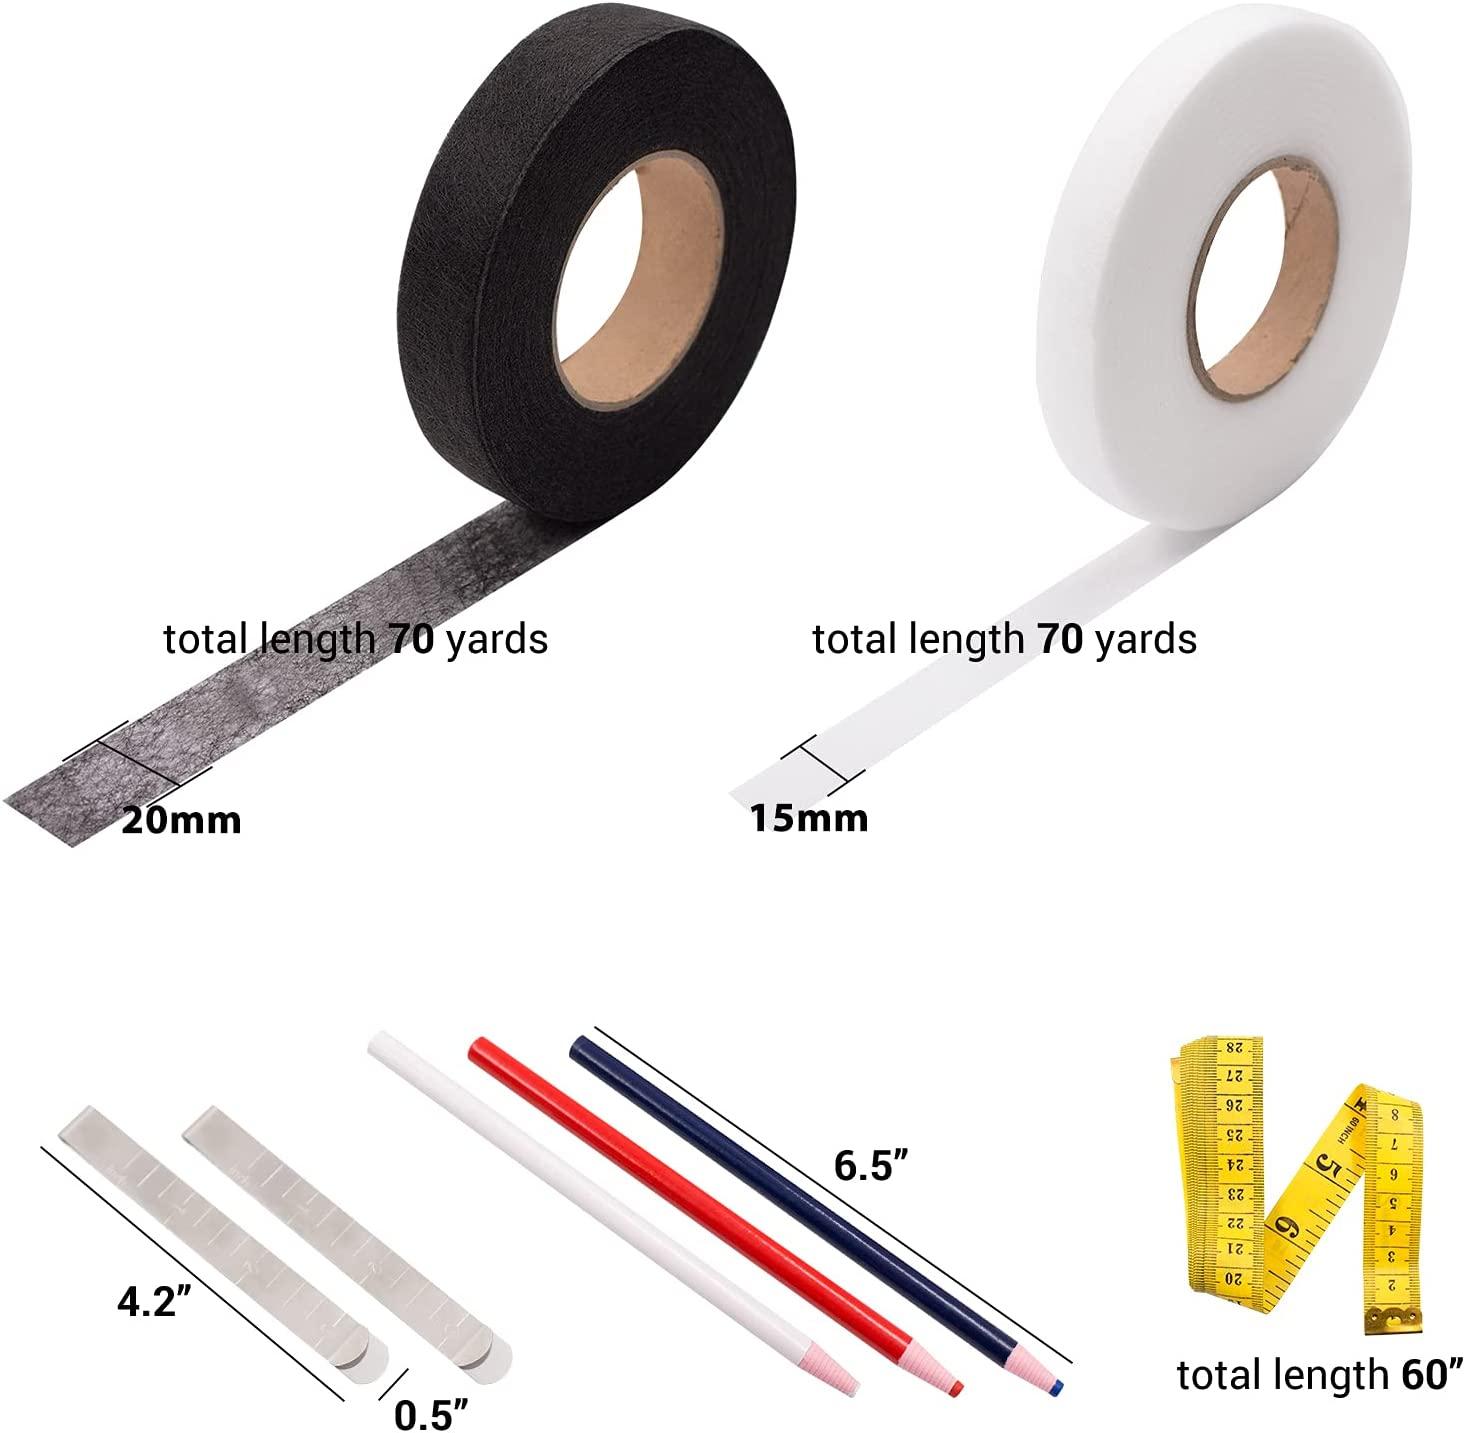 Daily Treasures Iron-on Hemming Tape, 2Rolls 140 Yards Fabric Fusing Tape  with 2 Sewing Clips+3 Mark Pencil & 1 Soft Tape Measure-Bonding Web  Adhesive Tape for Jeans Trousers Garment Cloth(15 & 20 mm)